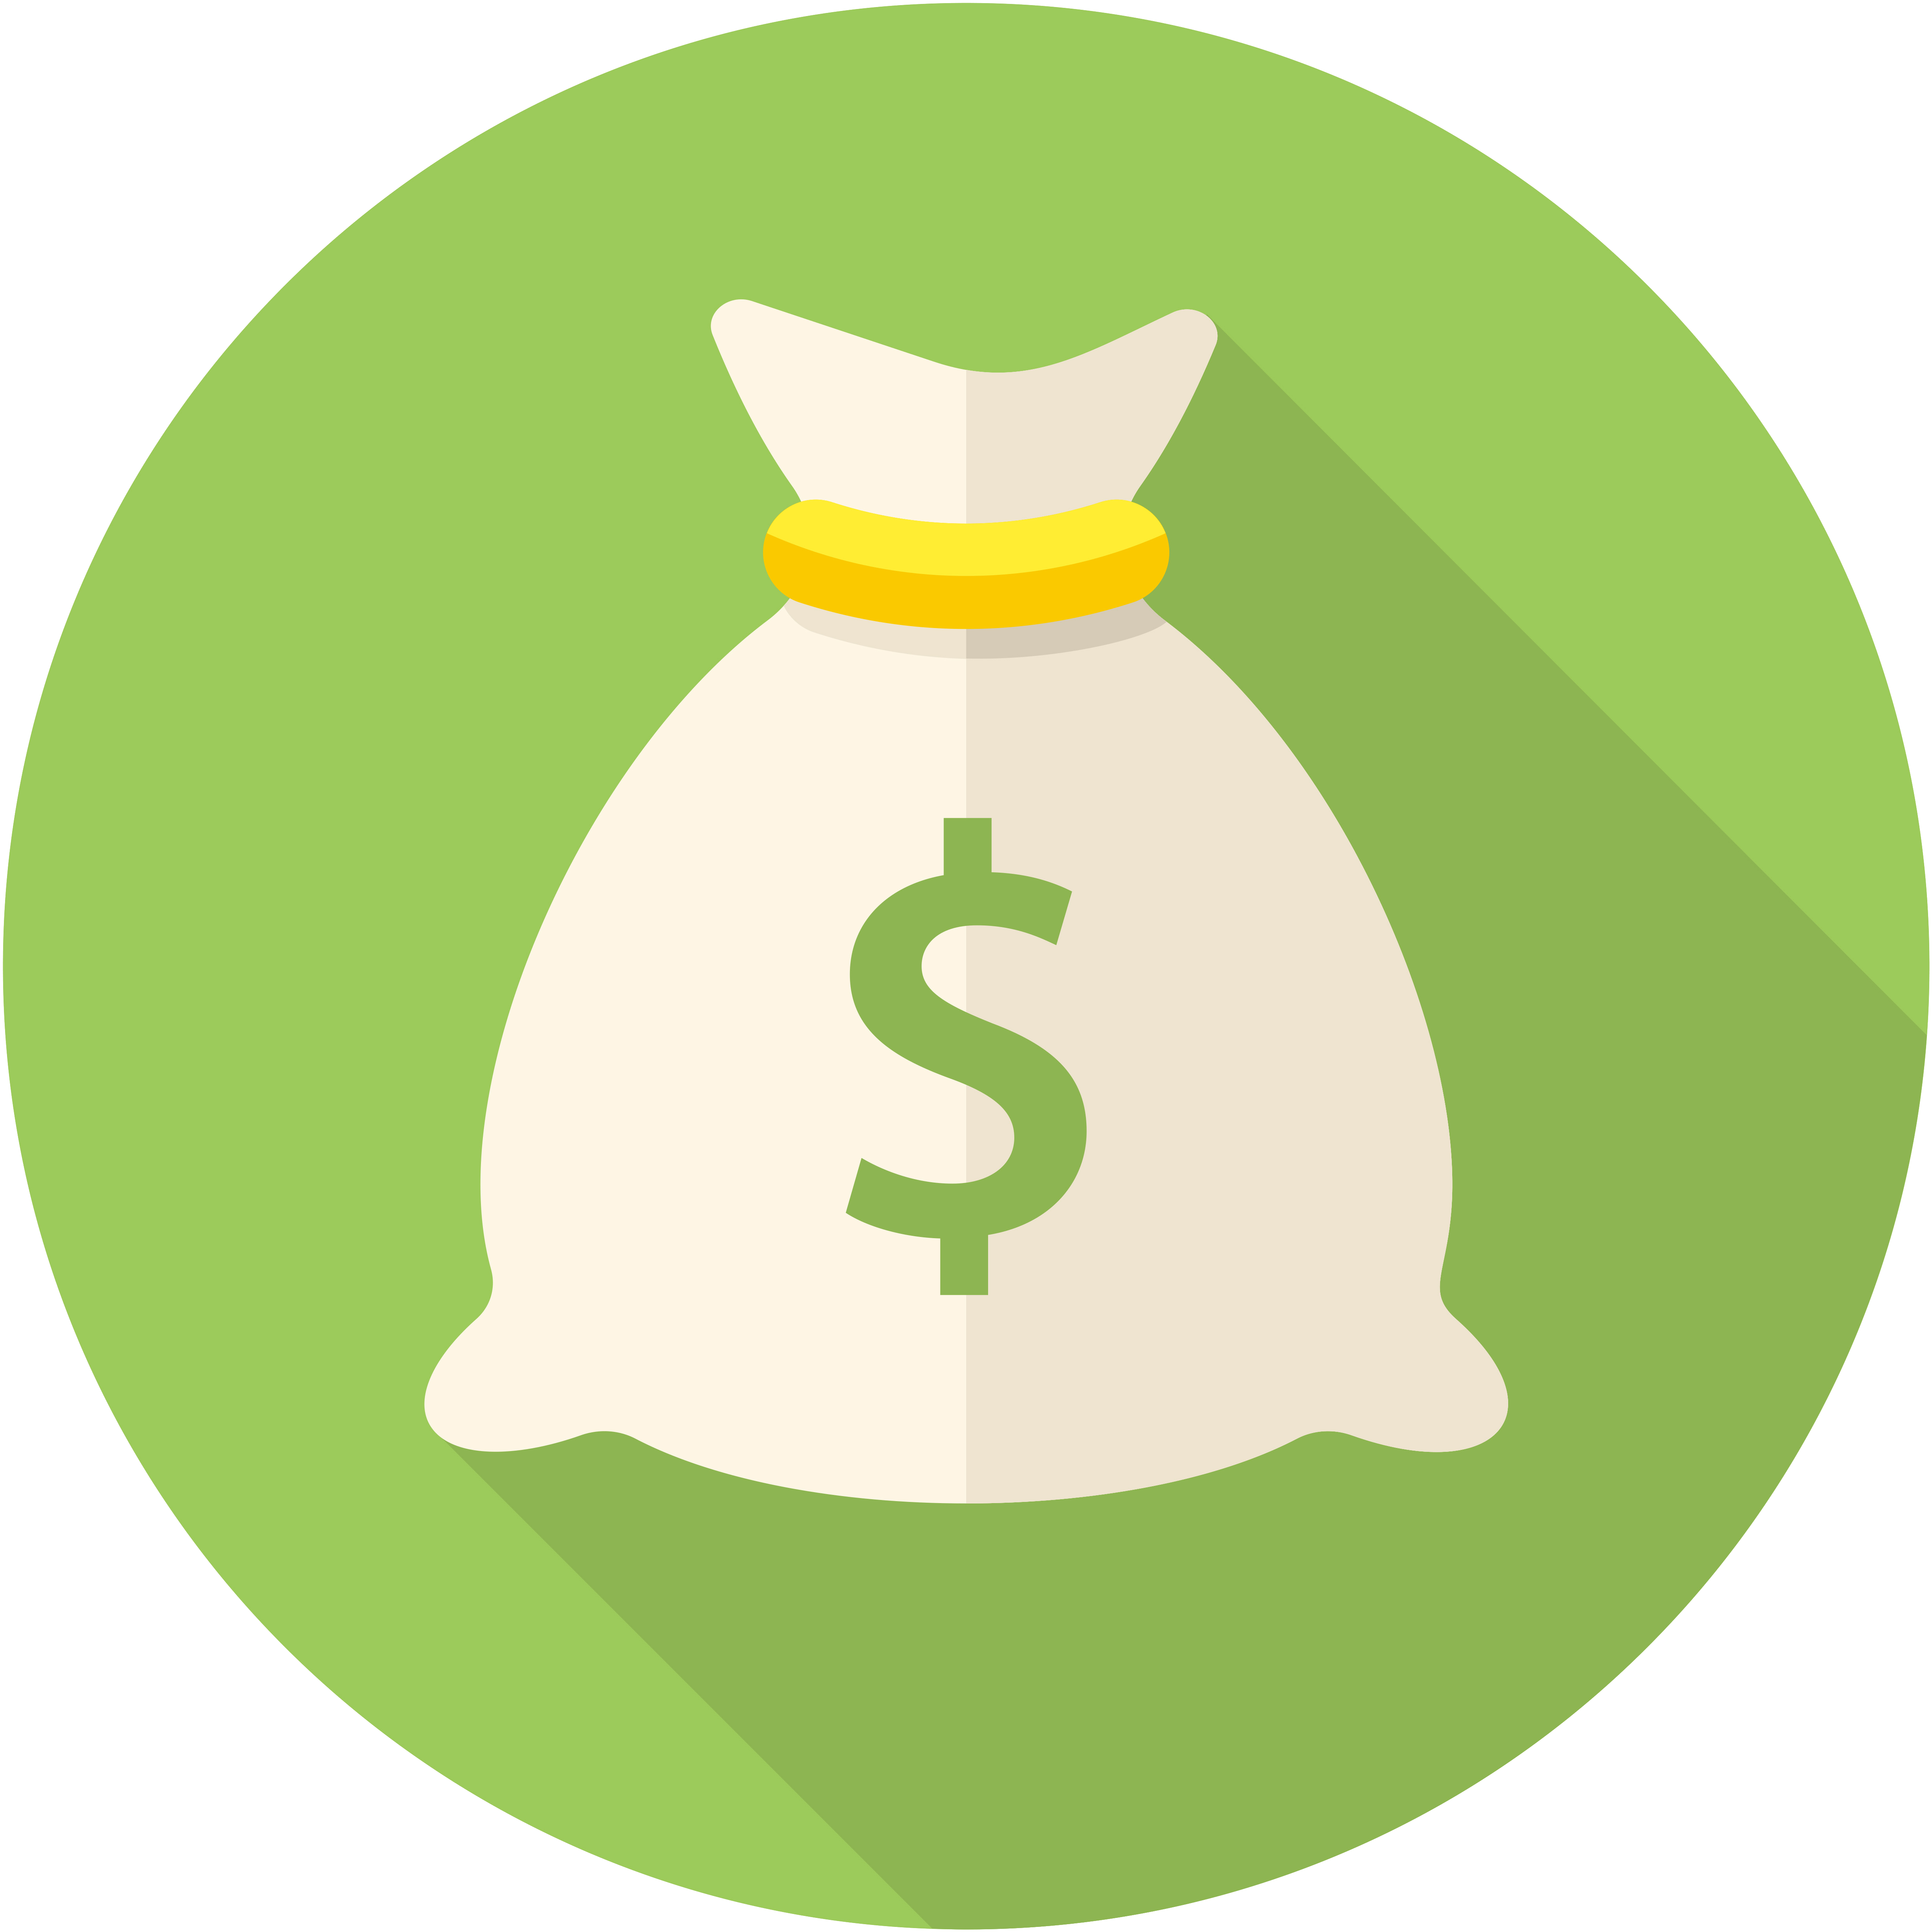 Salaried Opportunities - Money Bag Icon (5000x5000)